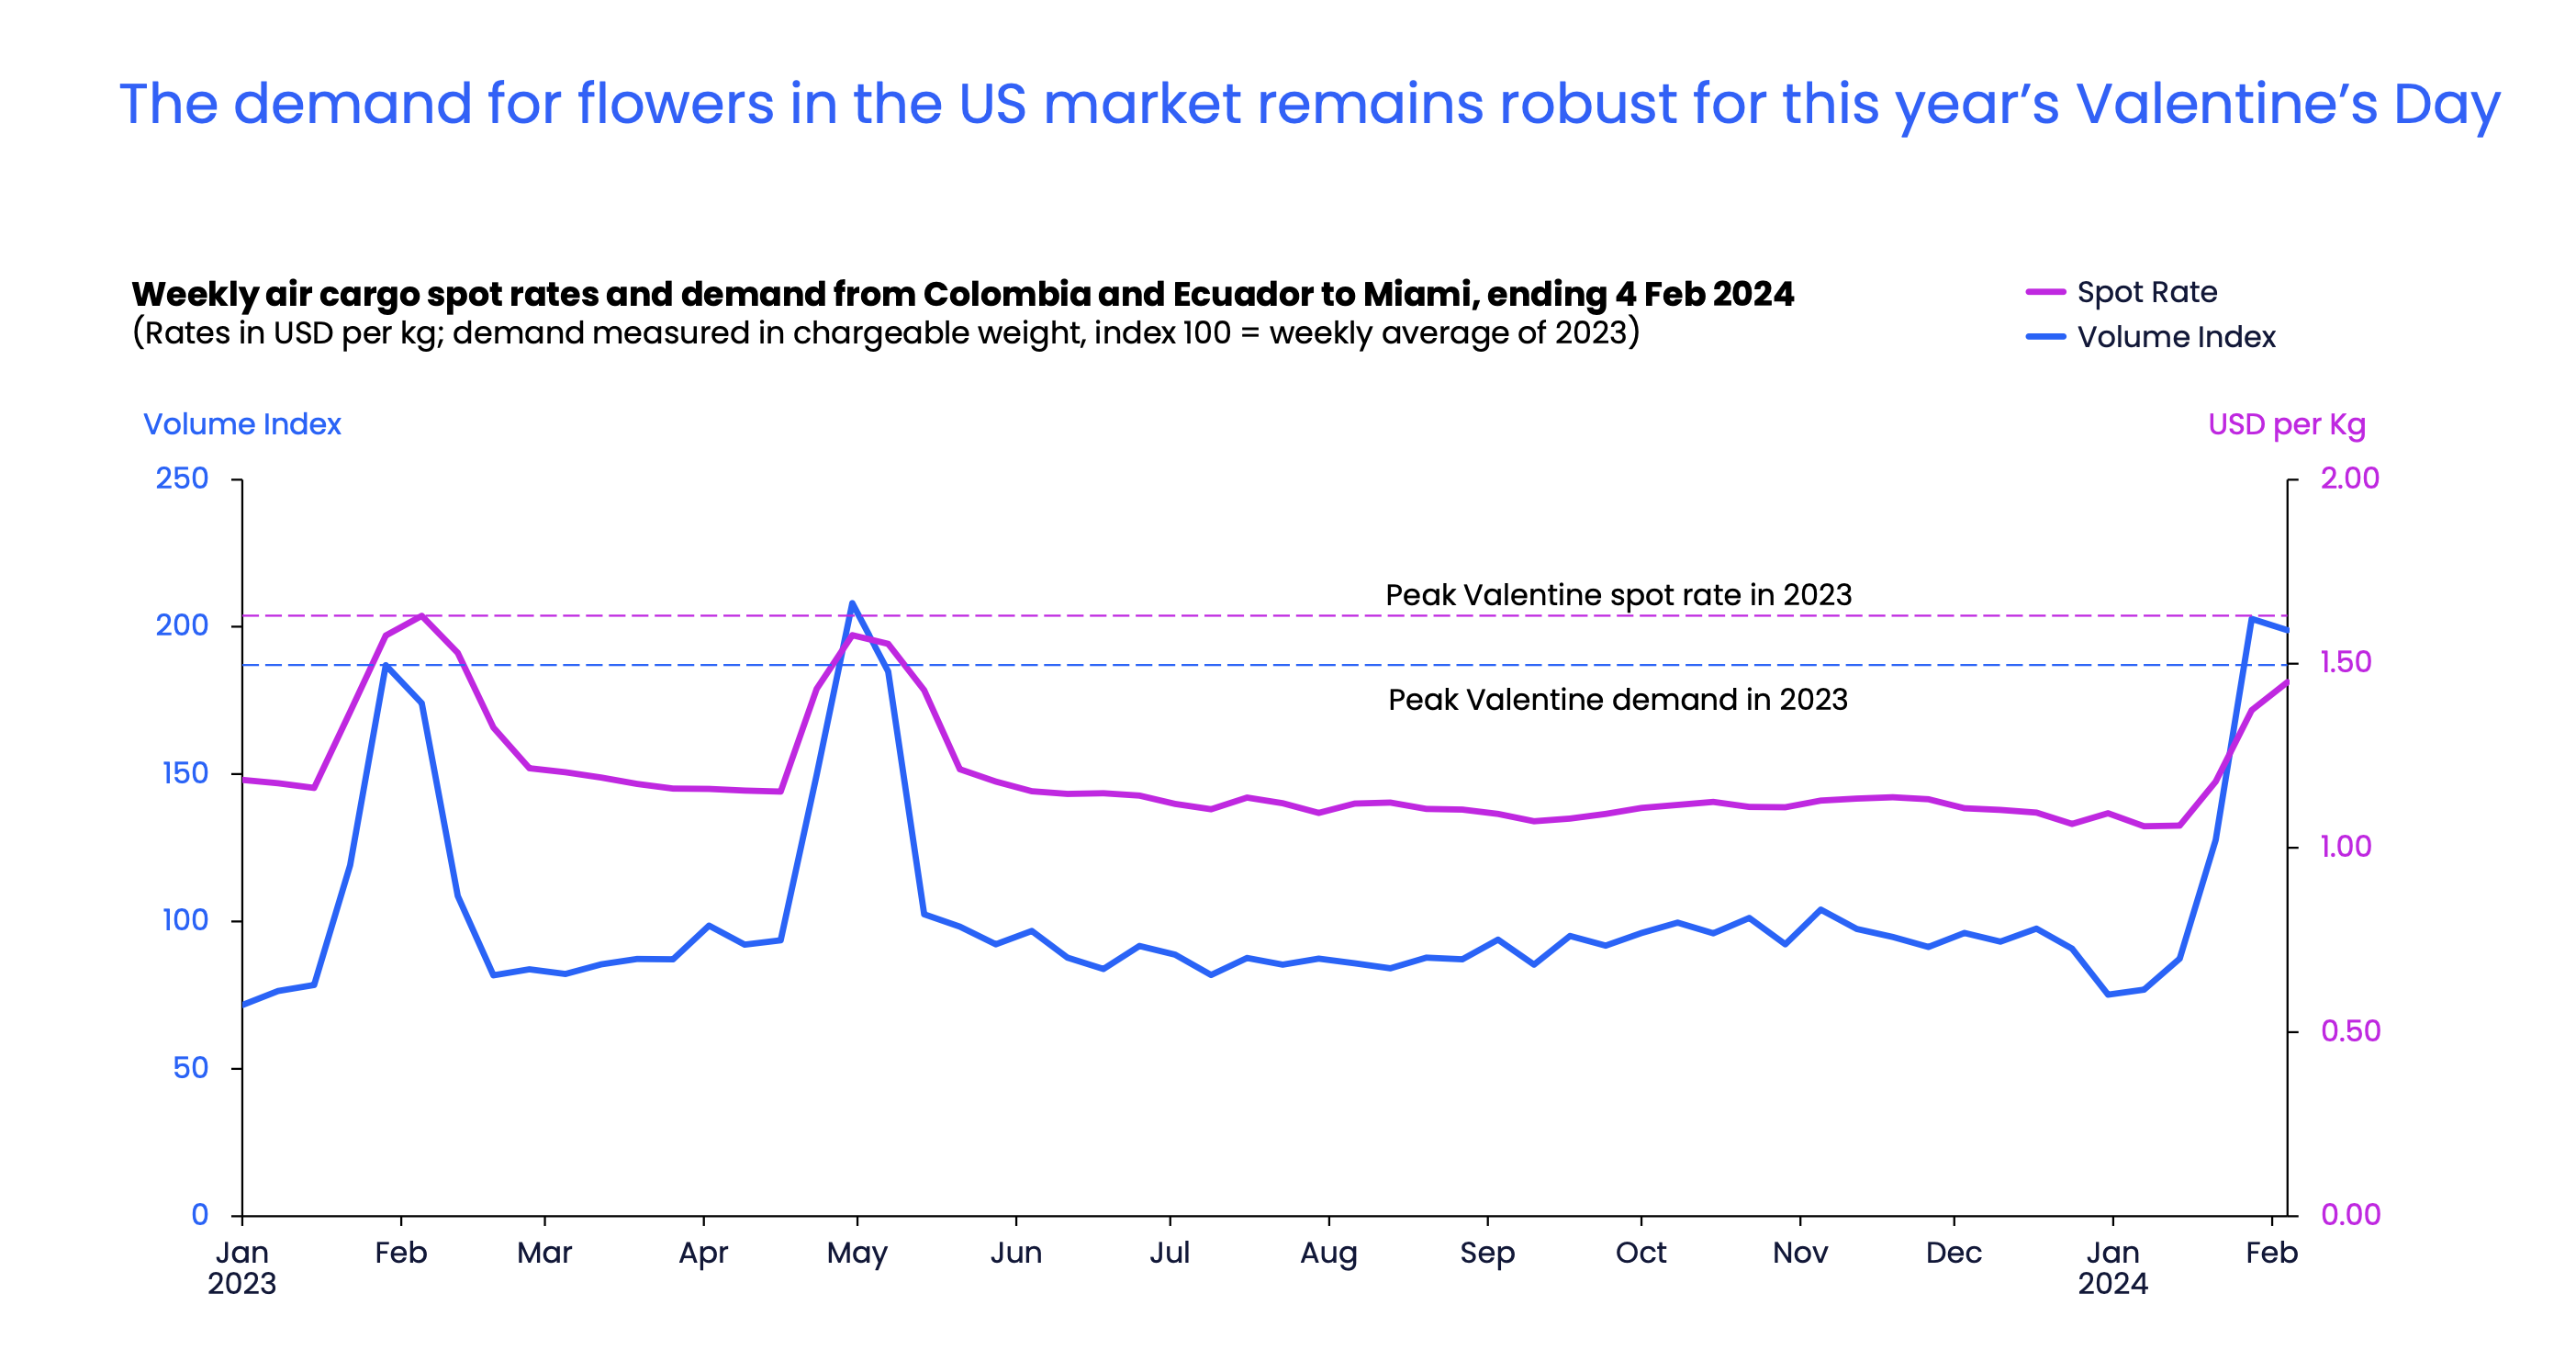 The demand of flowers in the US market